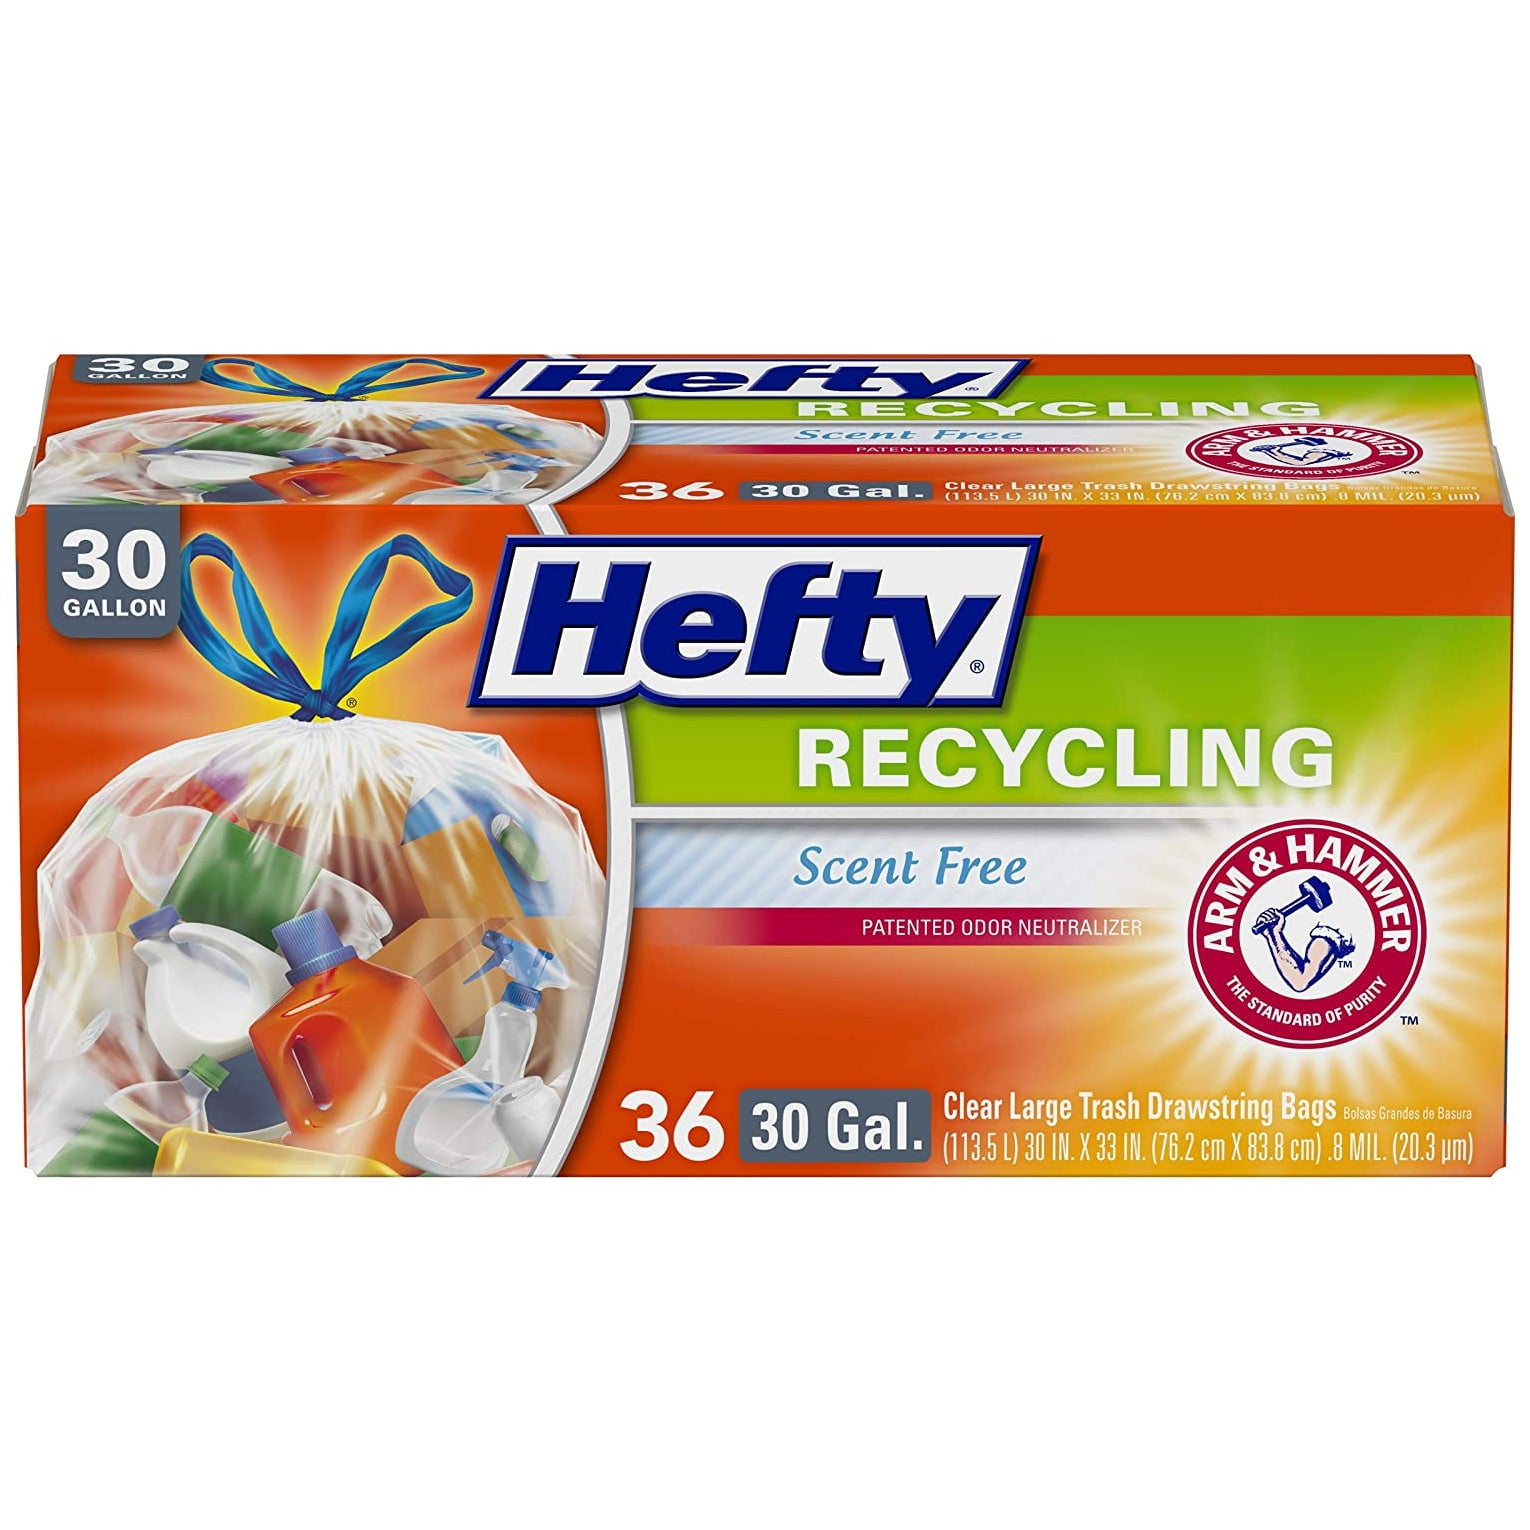 New Hefty E85743 Recycling Large Trash Drawstring Bags, Clear, 30-Gal,  36-Count